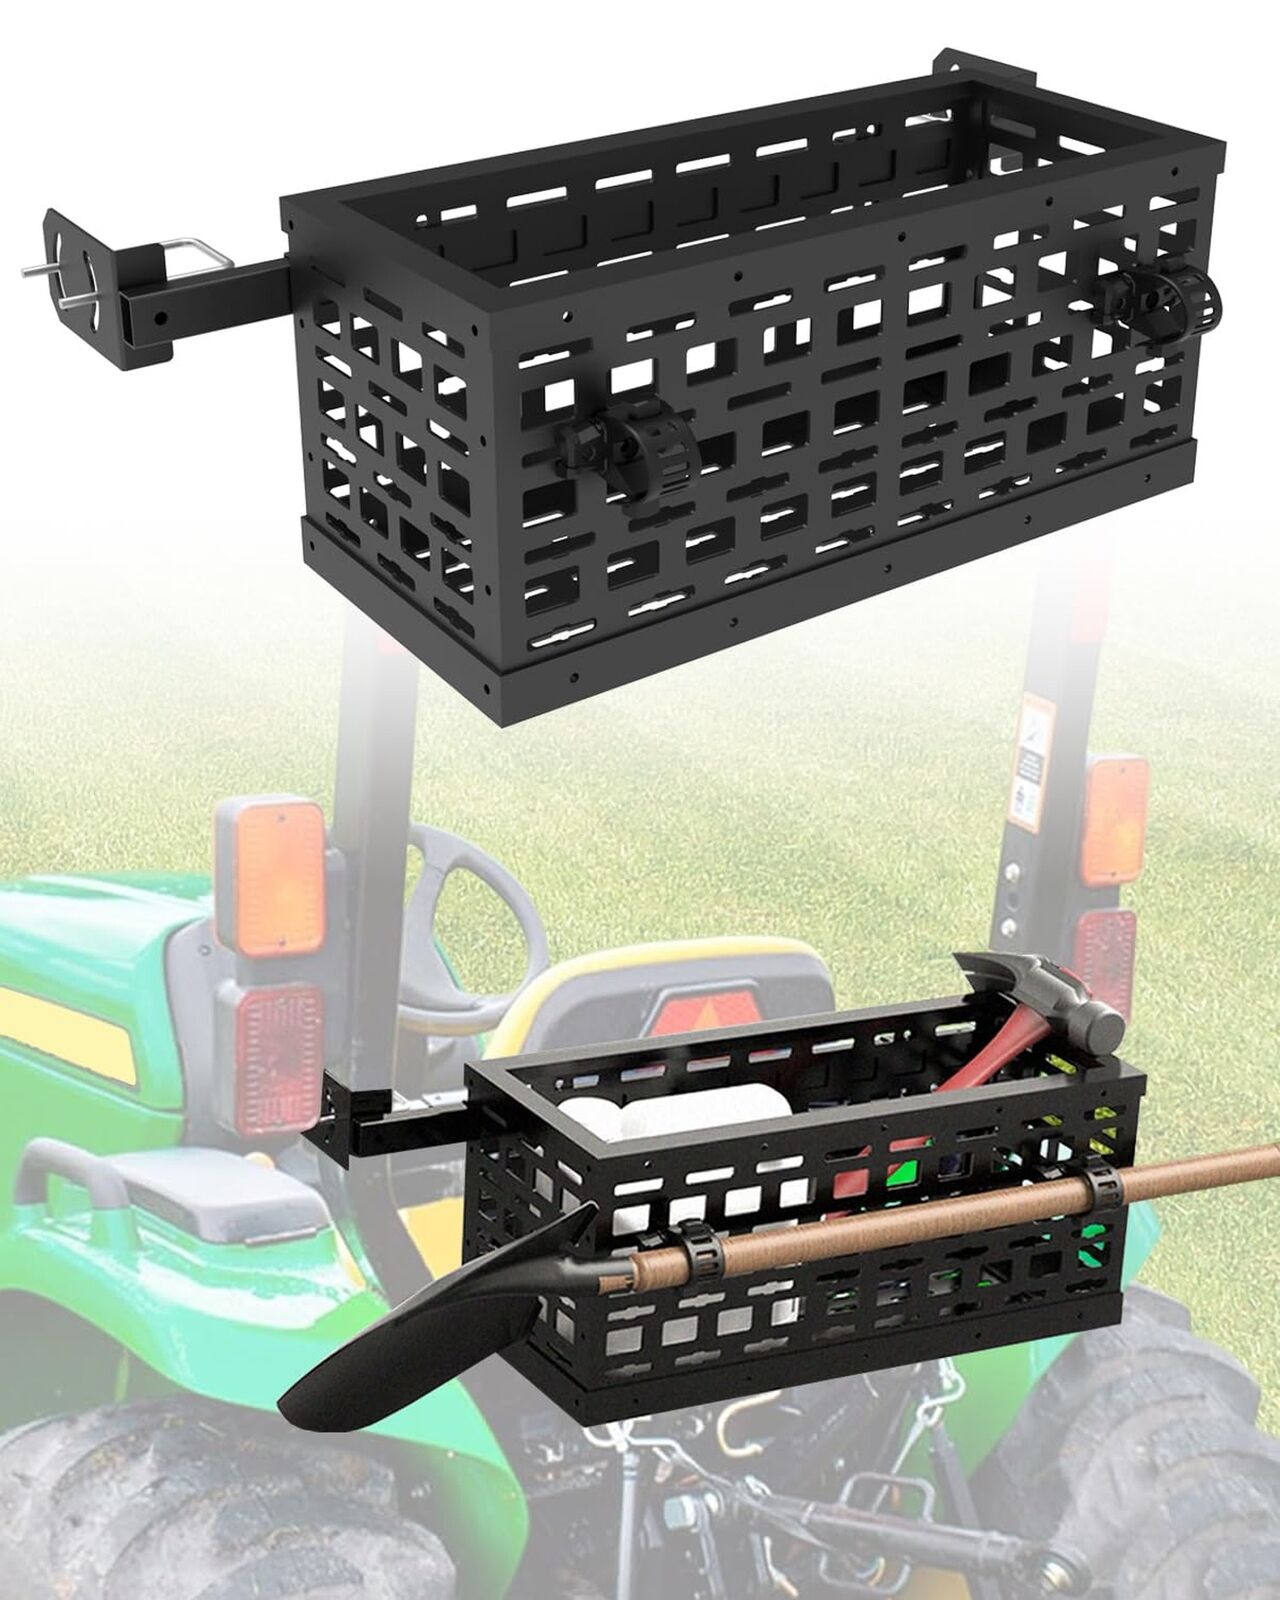 Universal-Fitting Tractor Tool Box/Tray with 24x10x10in Heavy Duty Multi-Func...